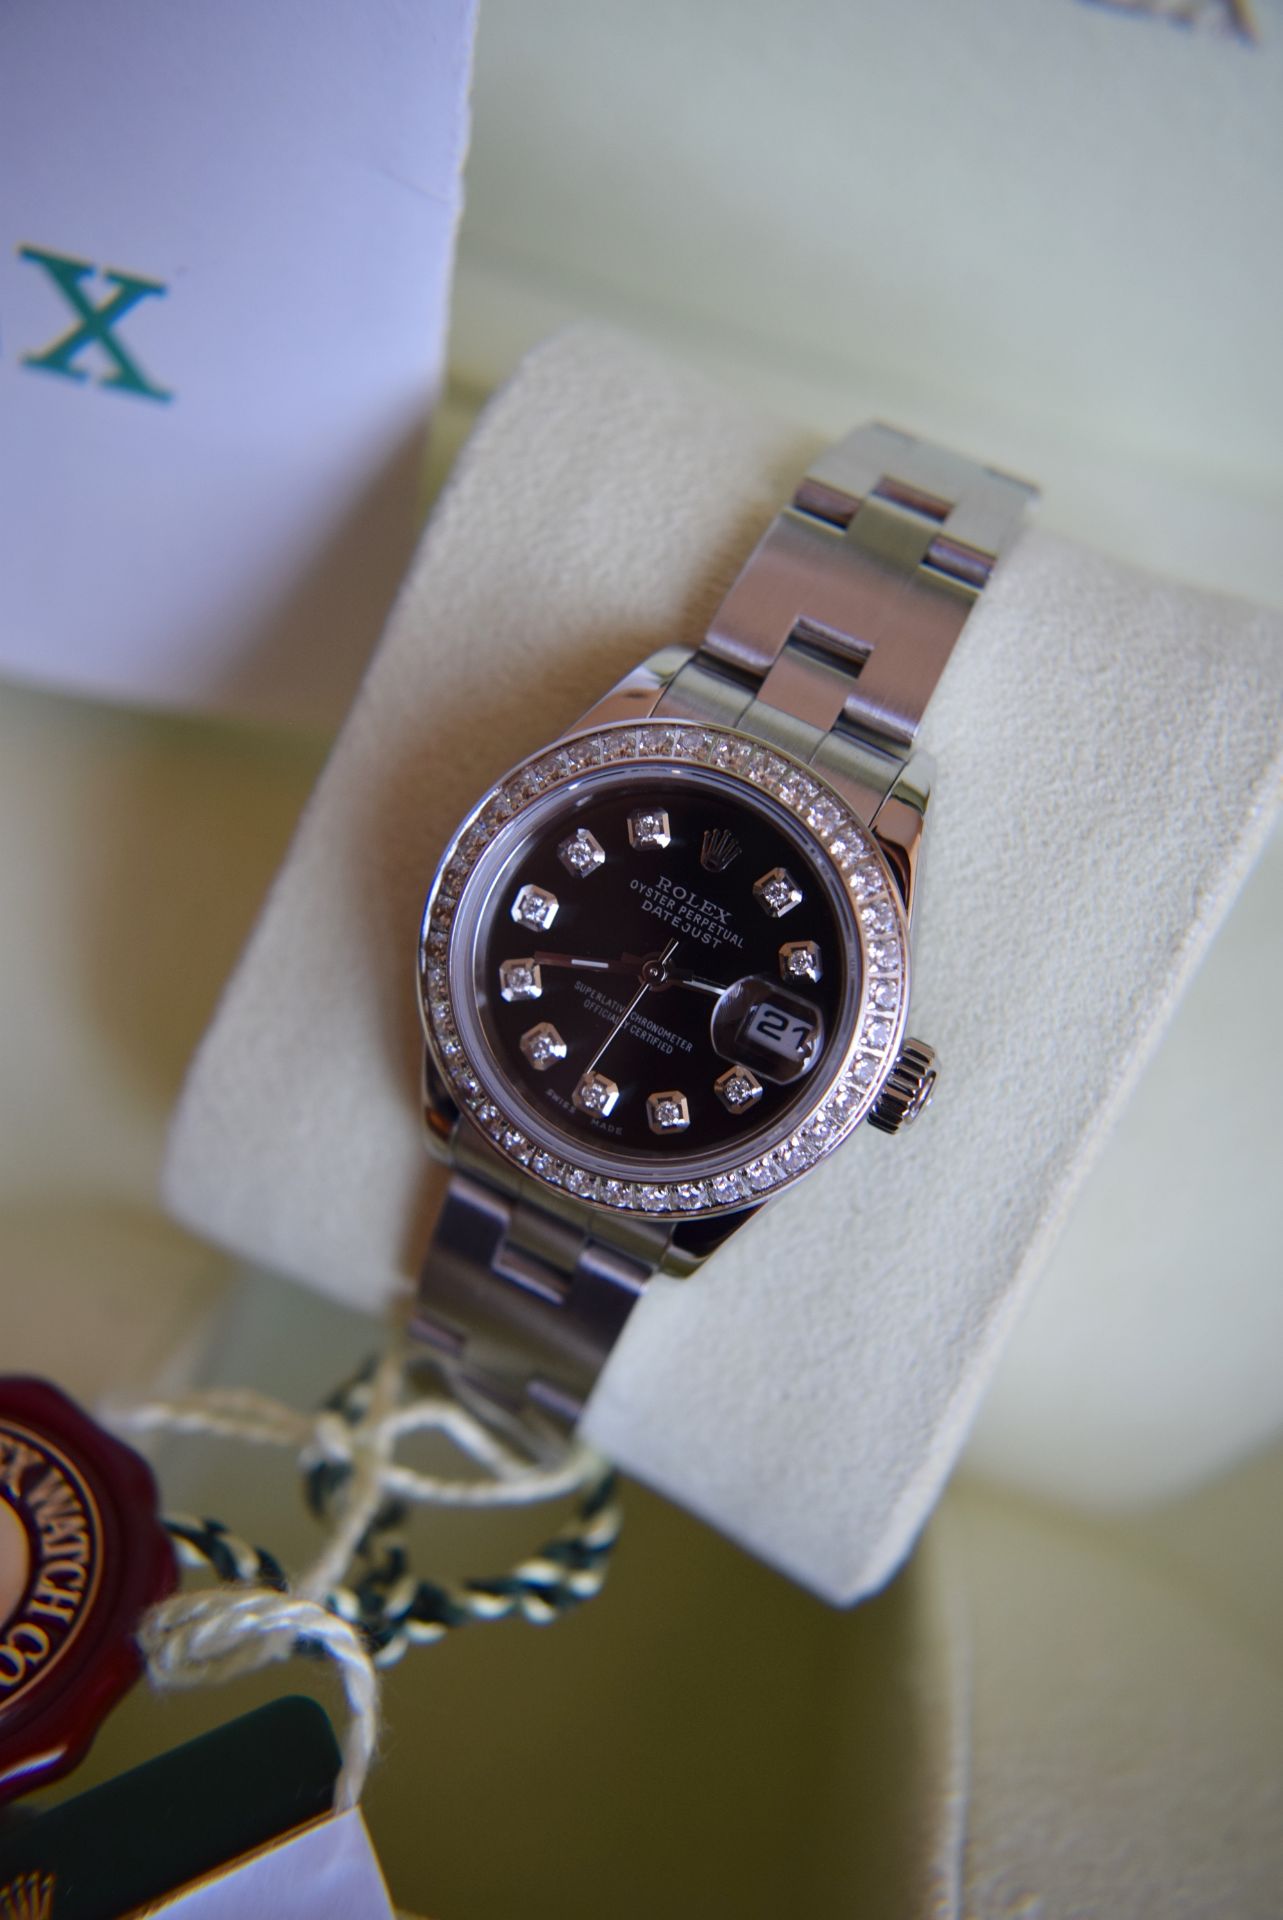 (Full Set) *Gorgeous* 2002 Rolex Oyster Datejust Stainless Steel - Glossy Black Diamond-set Dial - Image 24 of 25